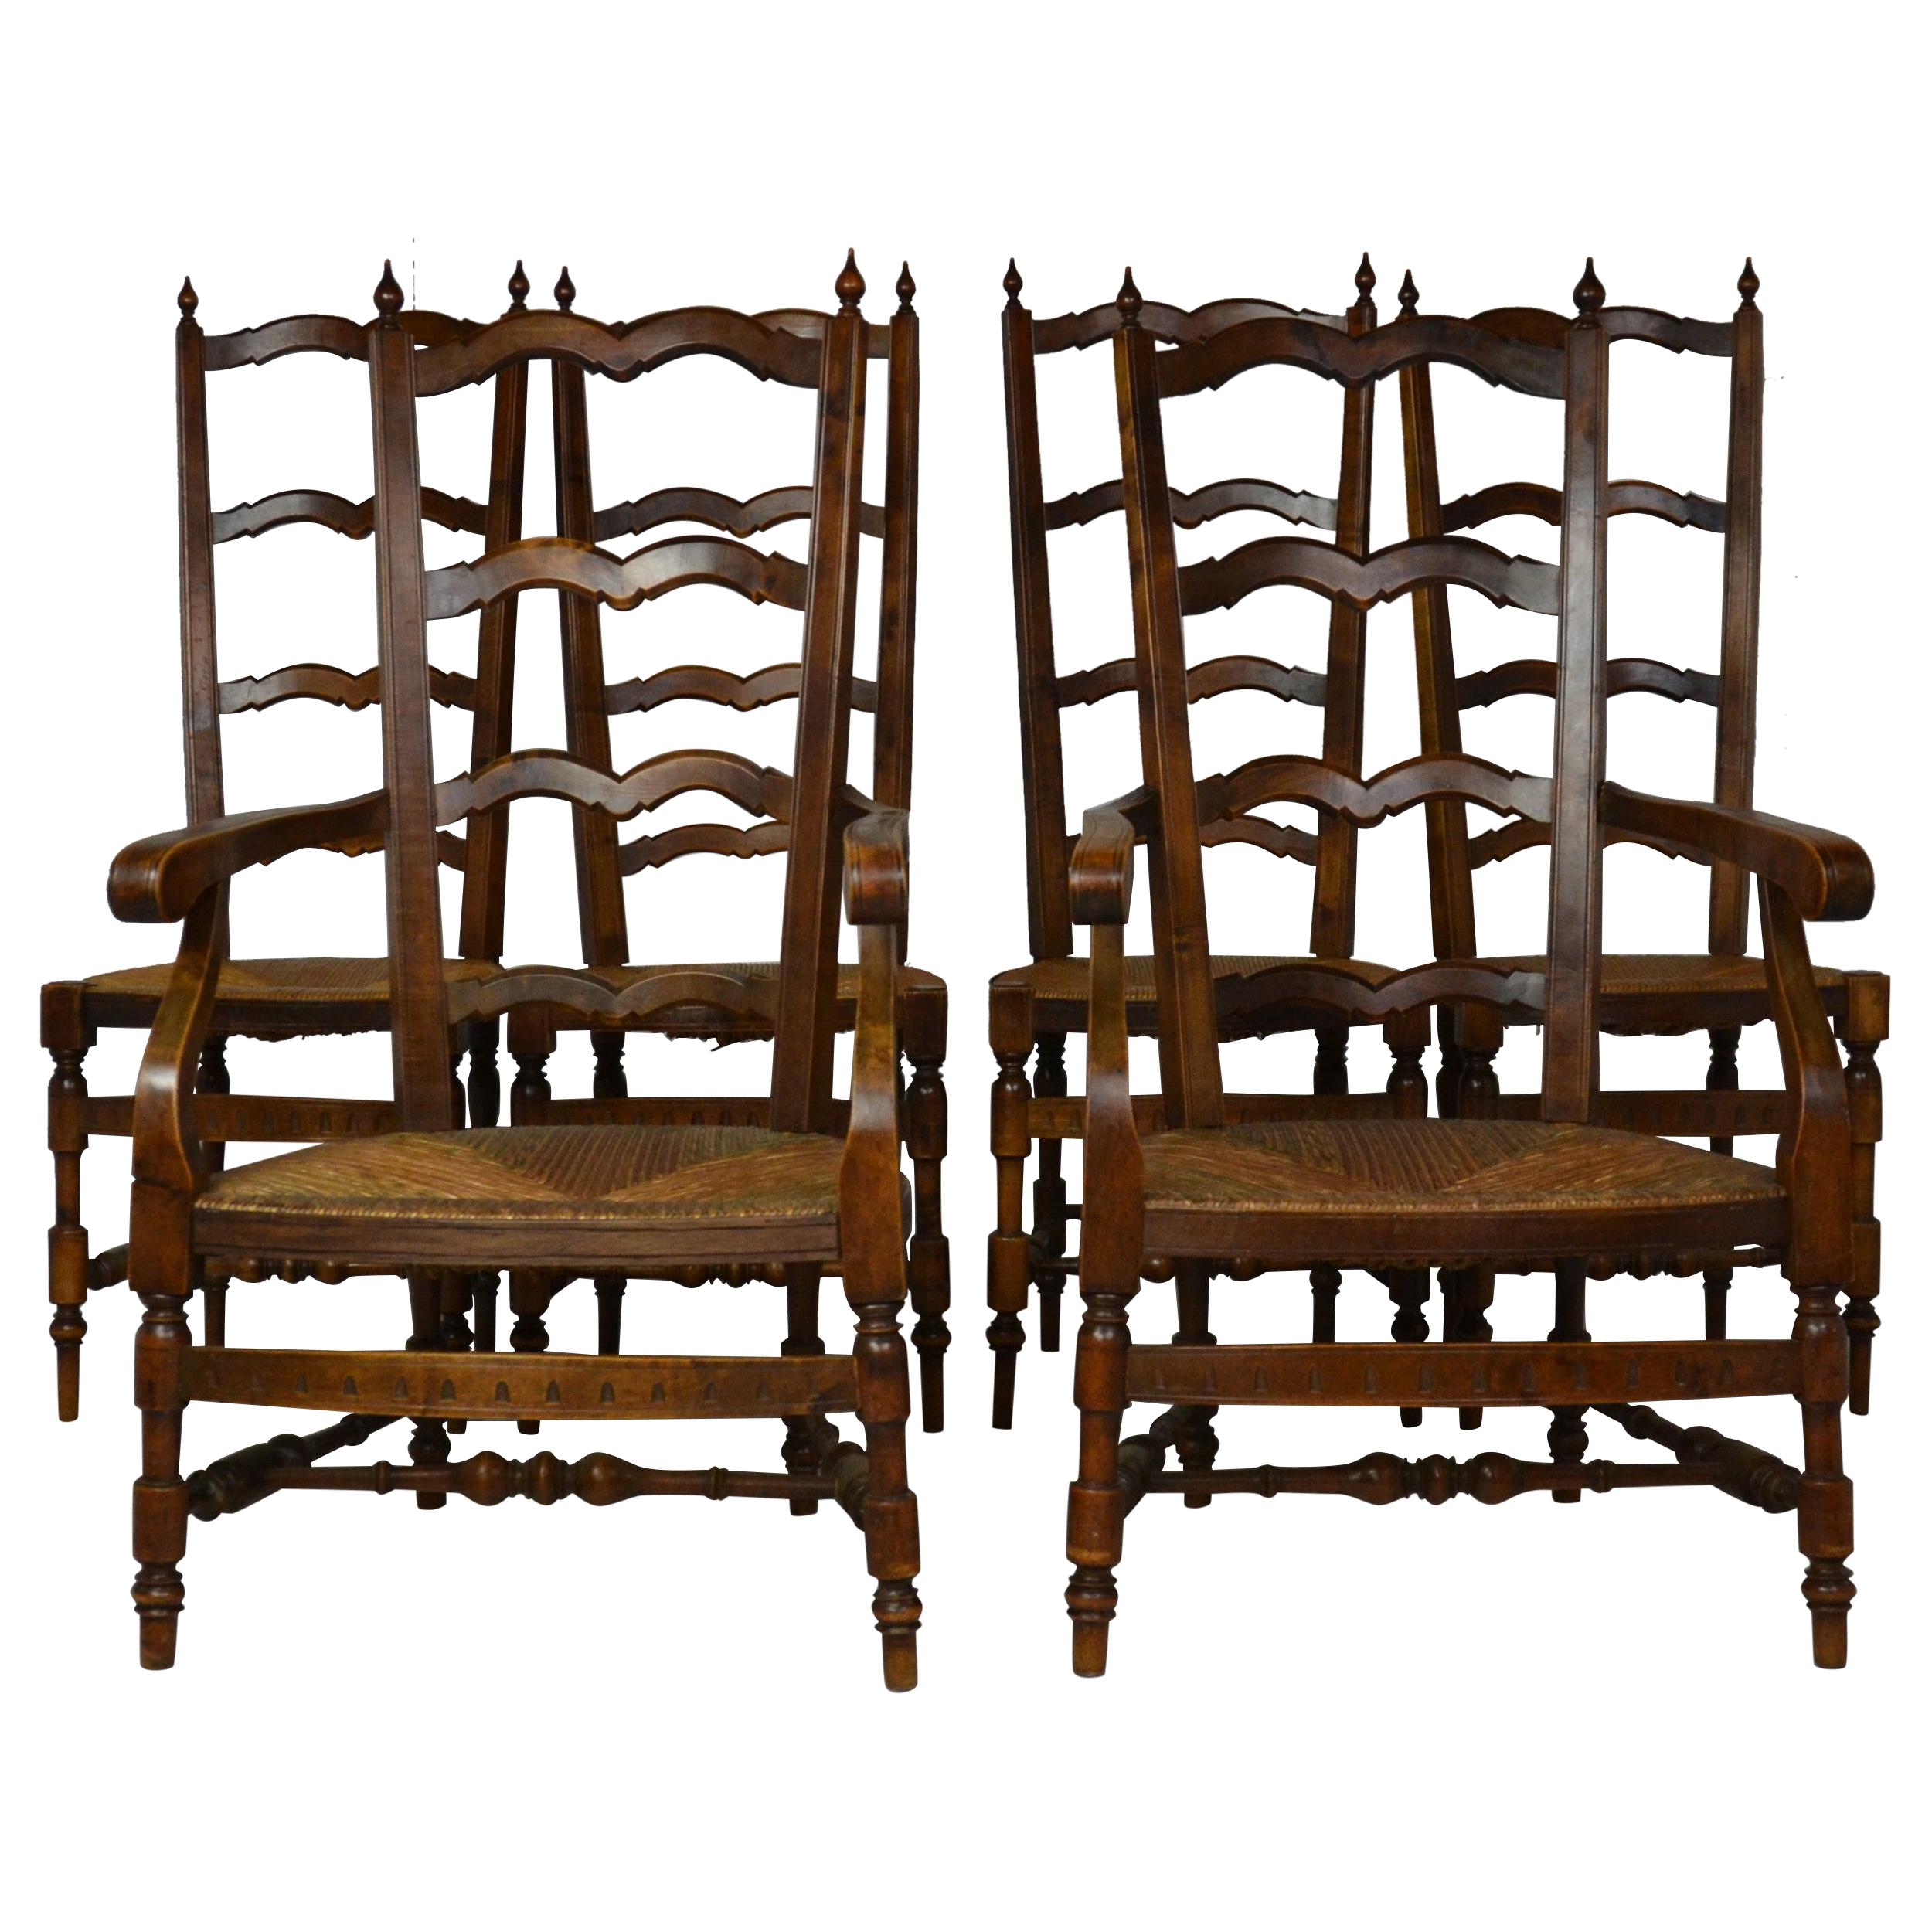 Set of 6 French Provincial Ladder-Back Chairs